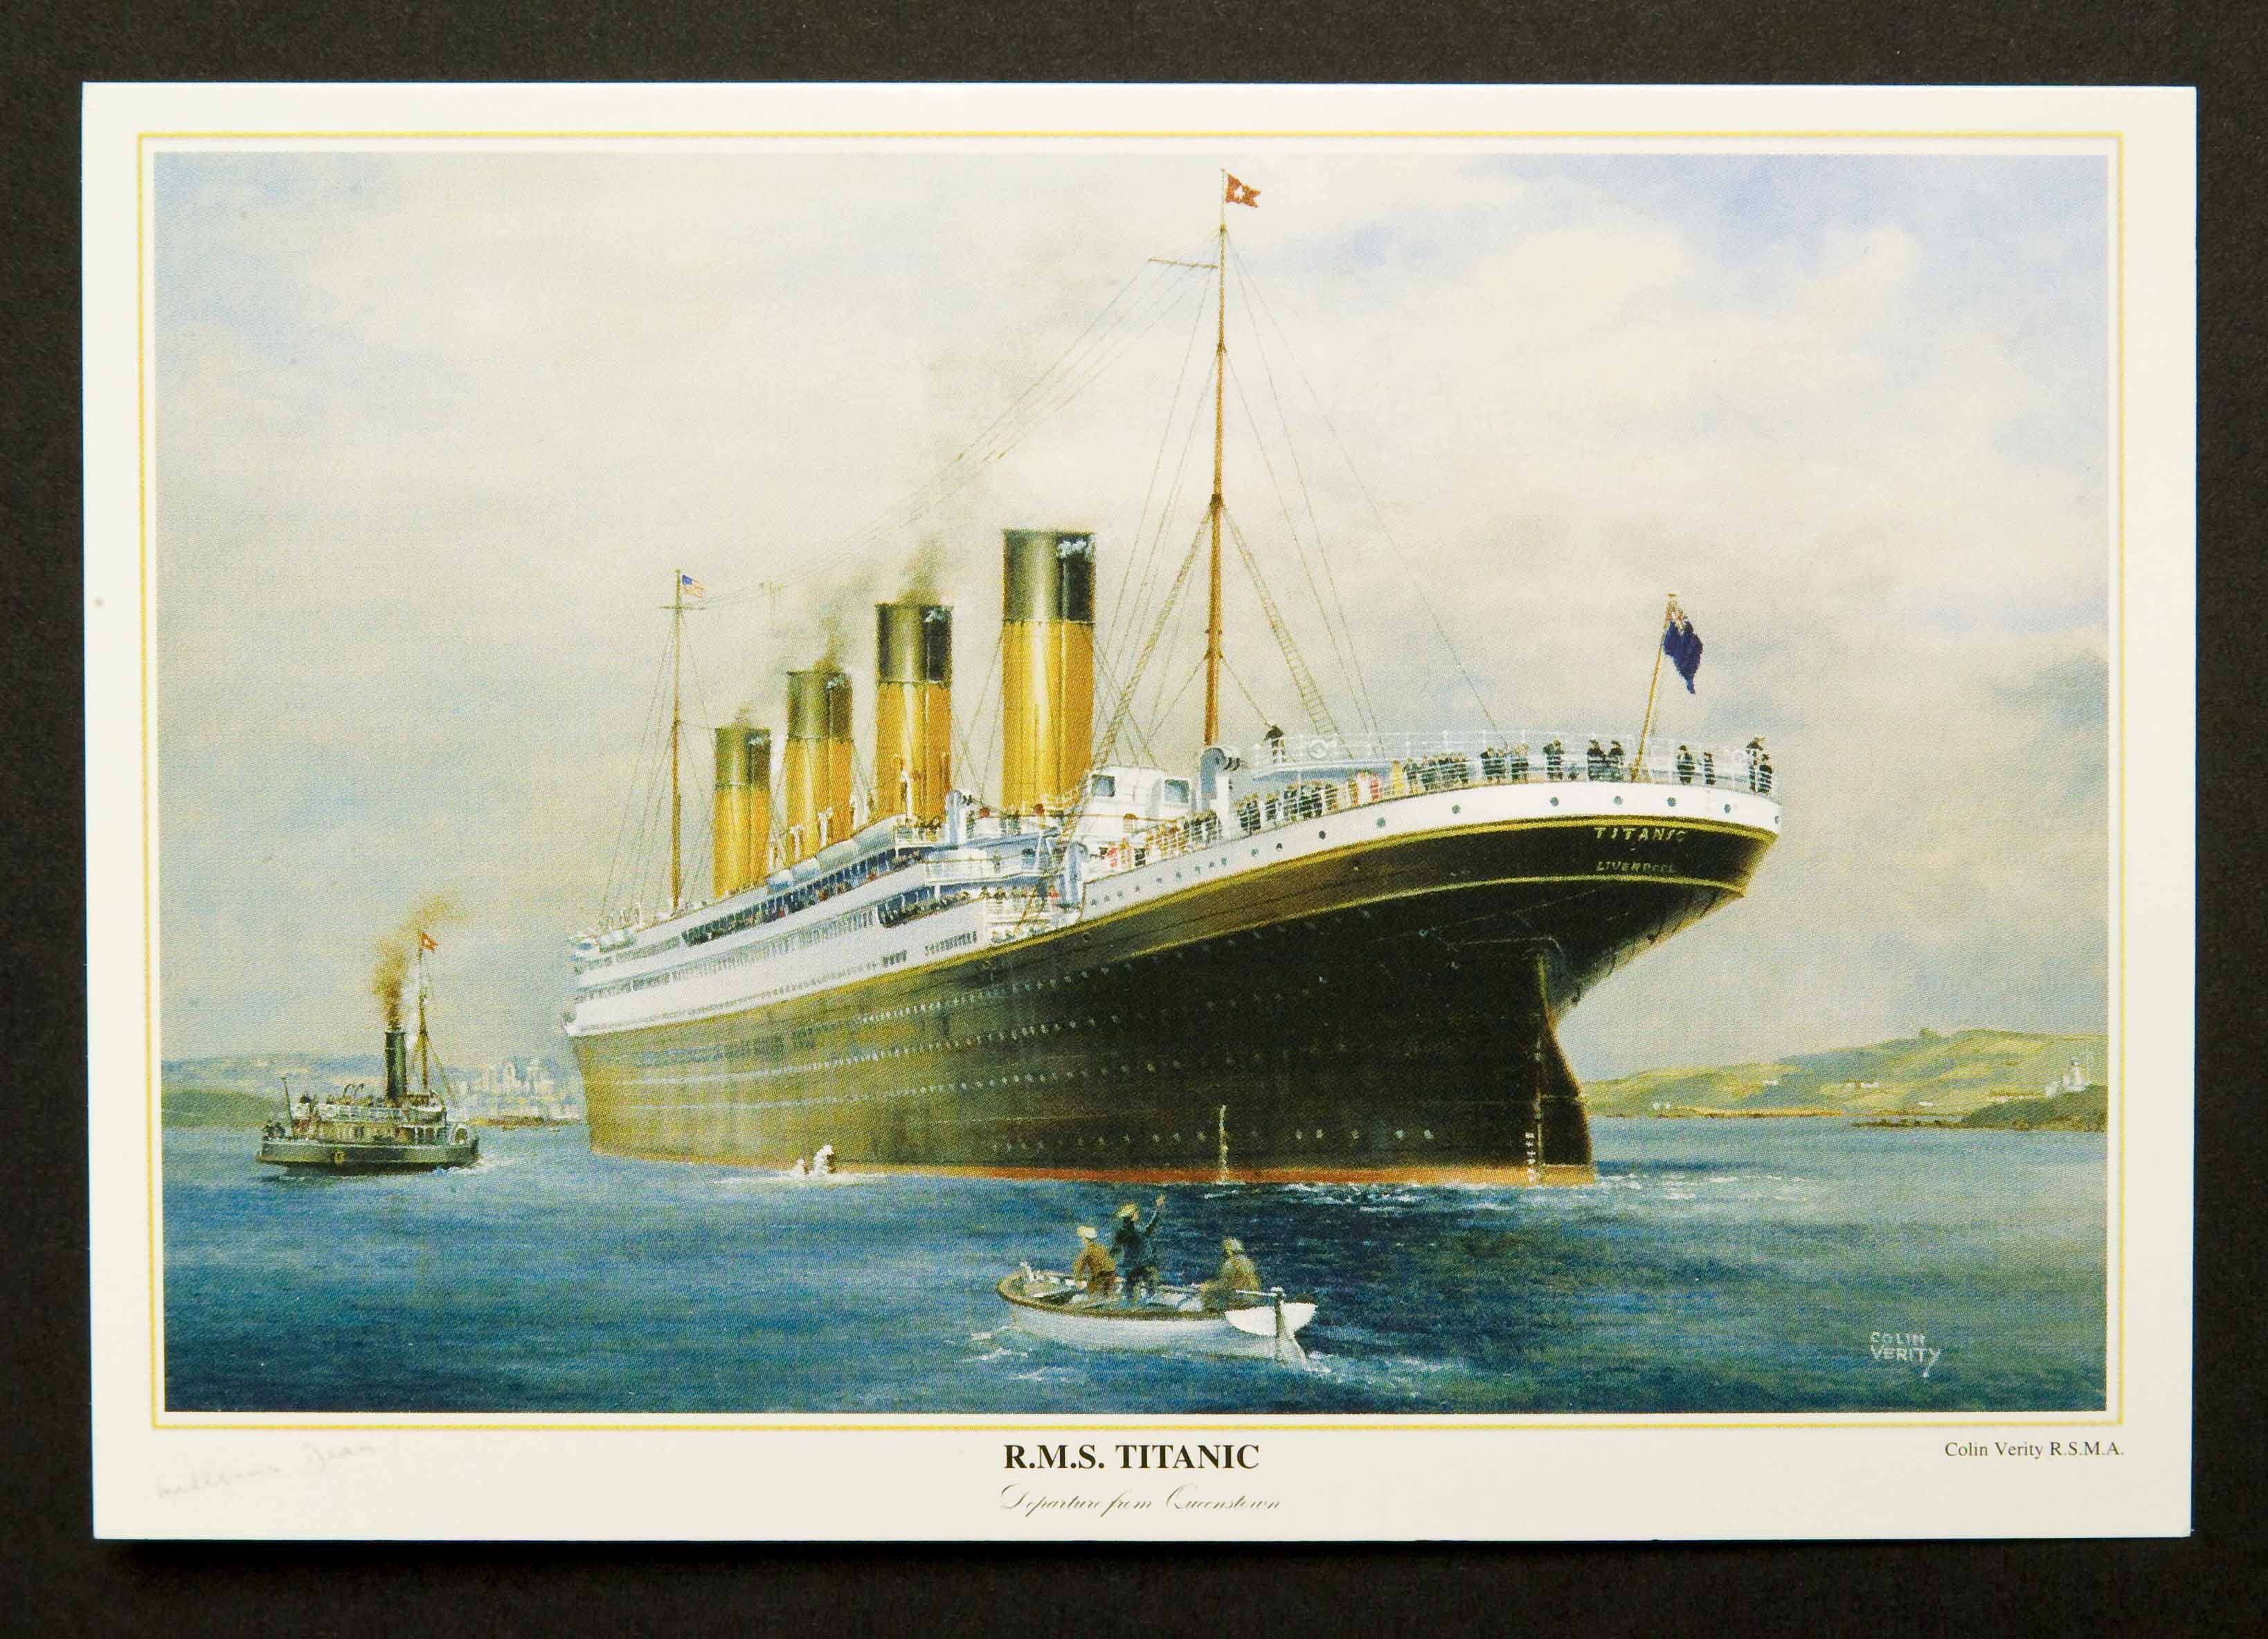 Titanic Queenstown A2 size Poster by Colin Verity